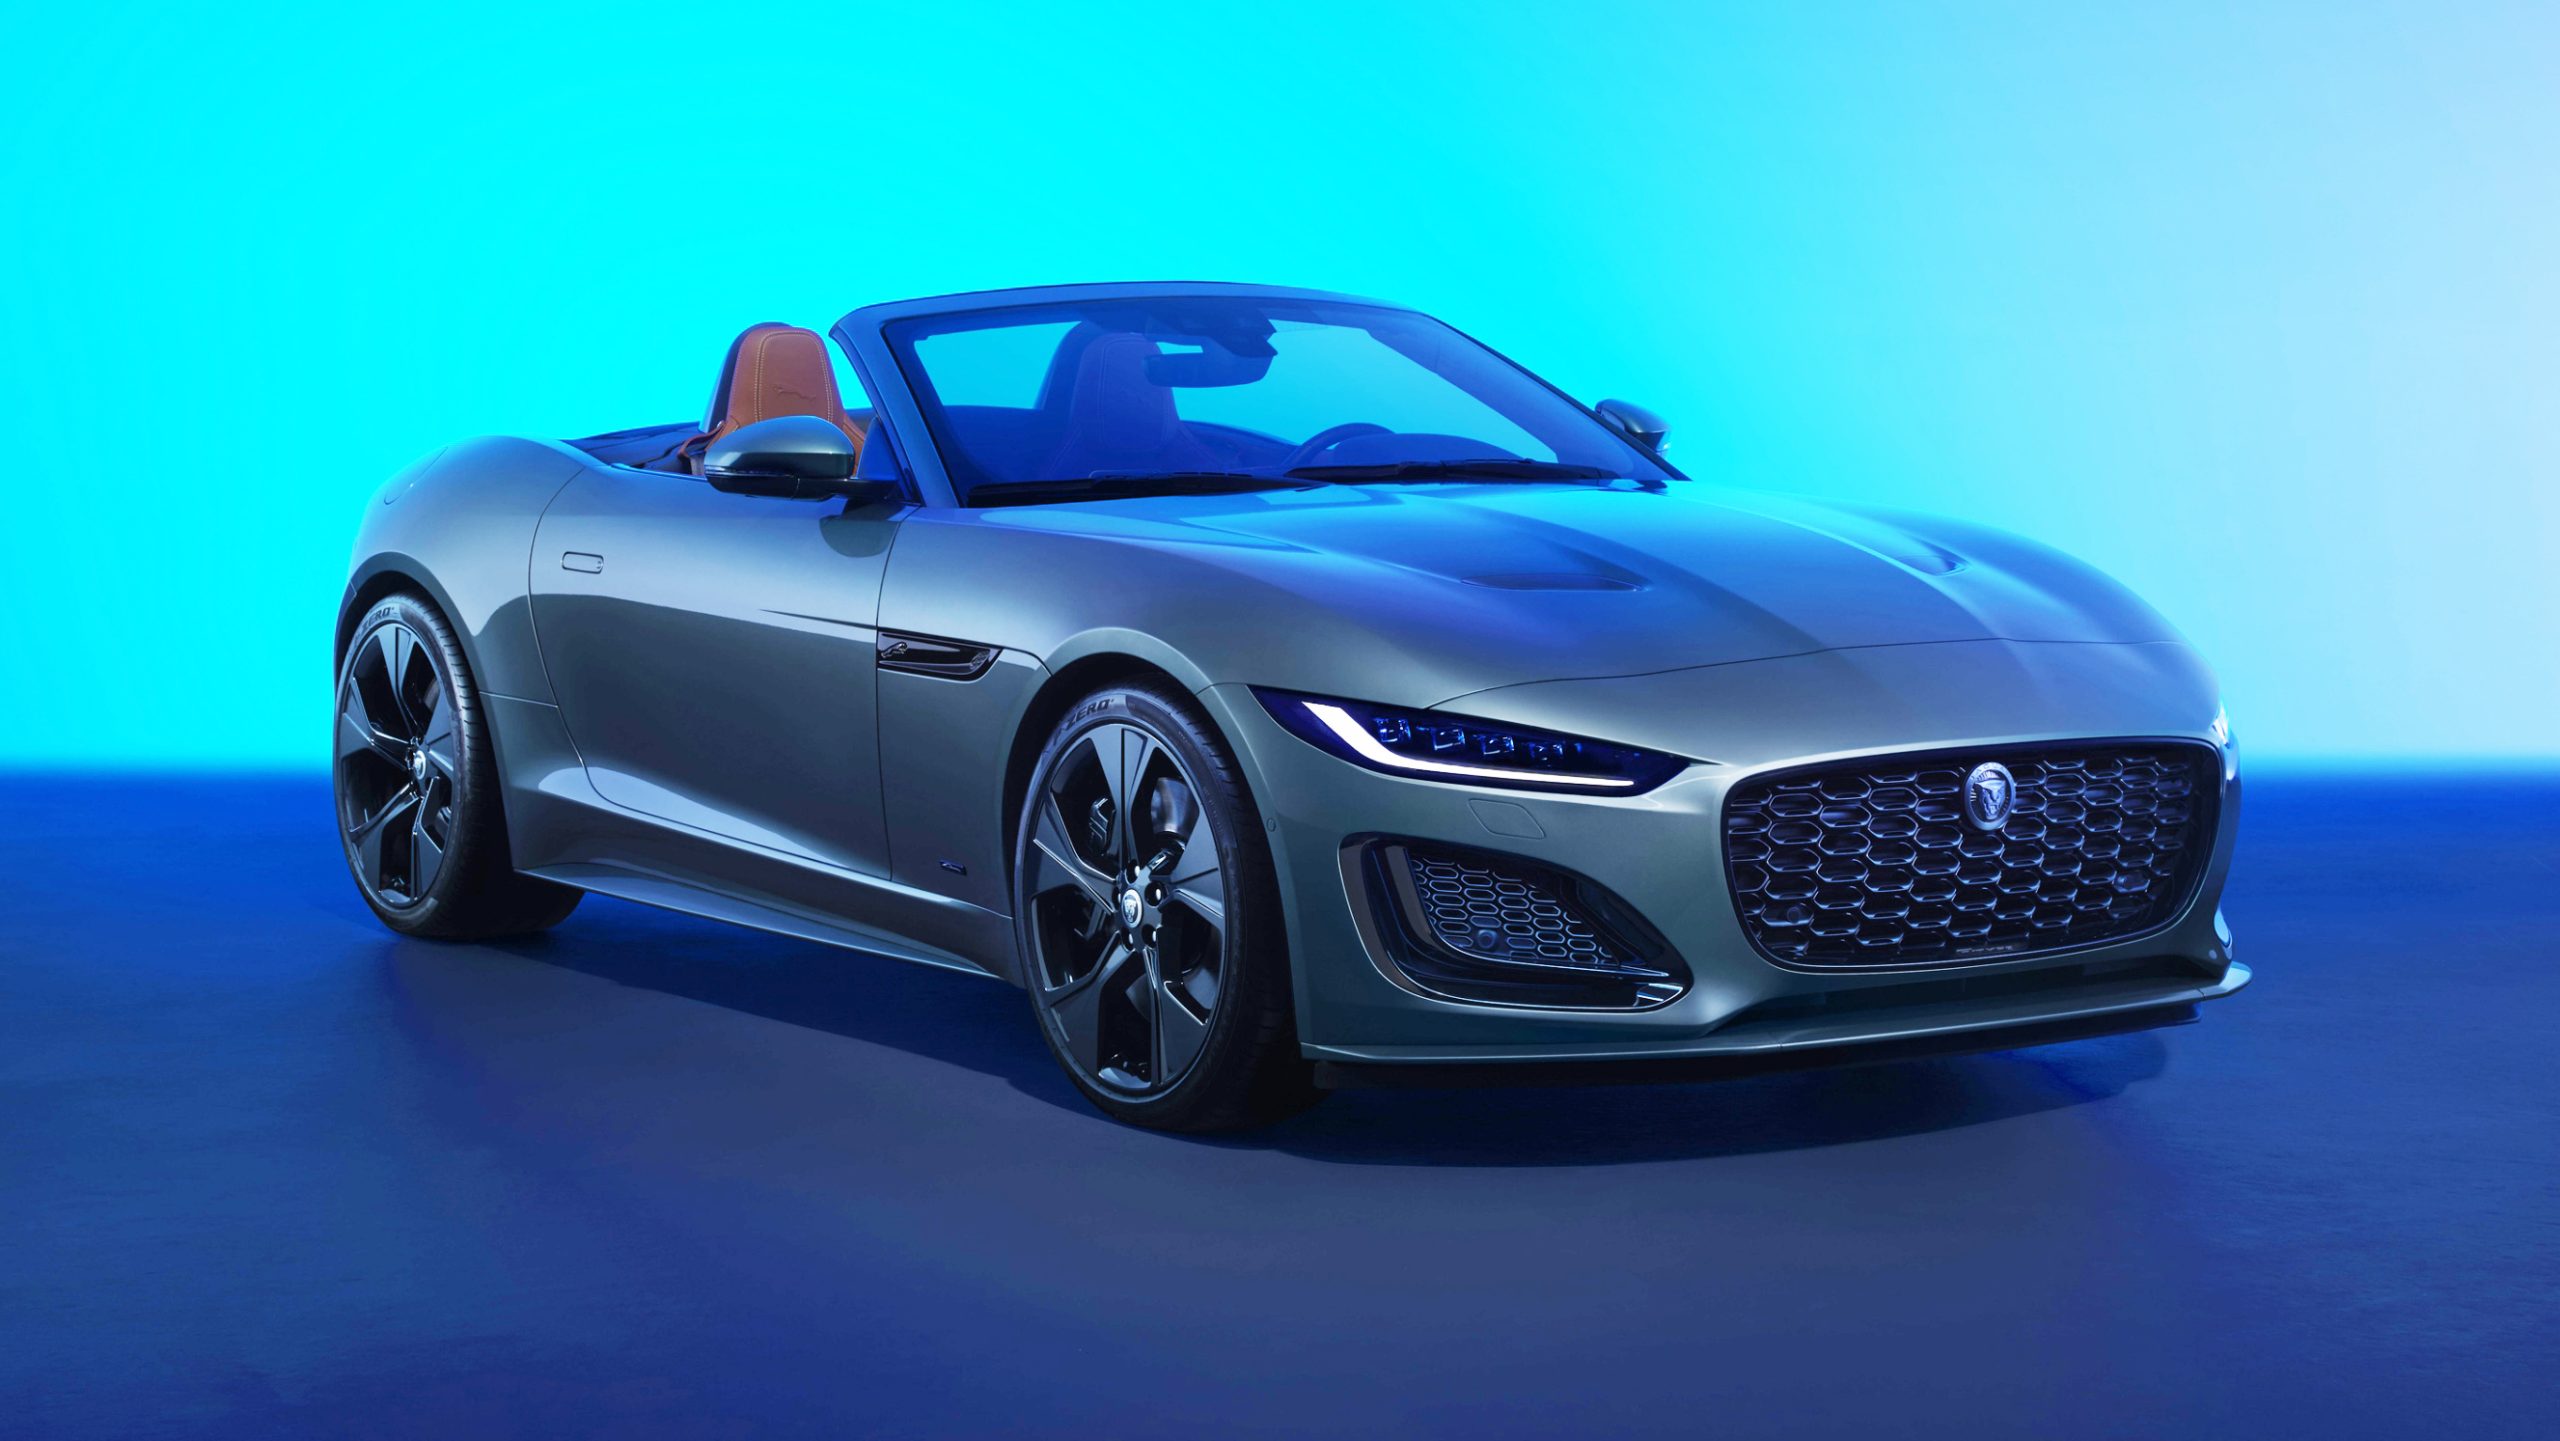 Front angled view of the Jaguar F-Type convertible